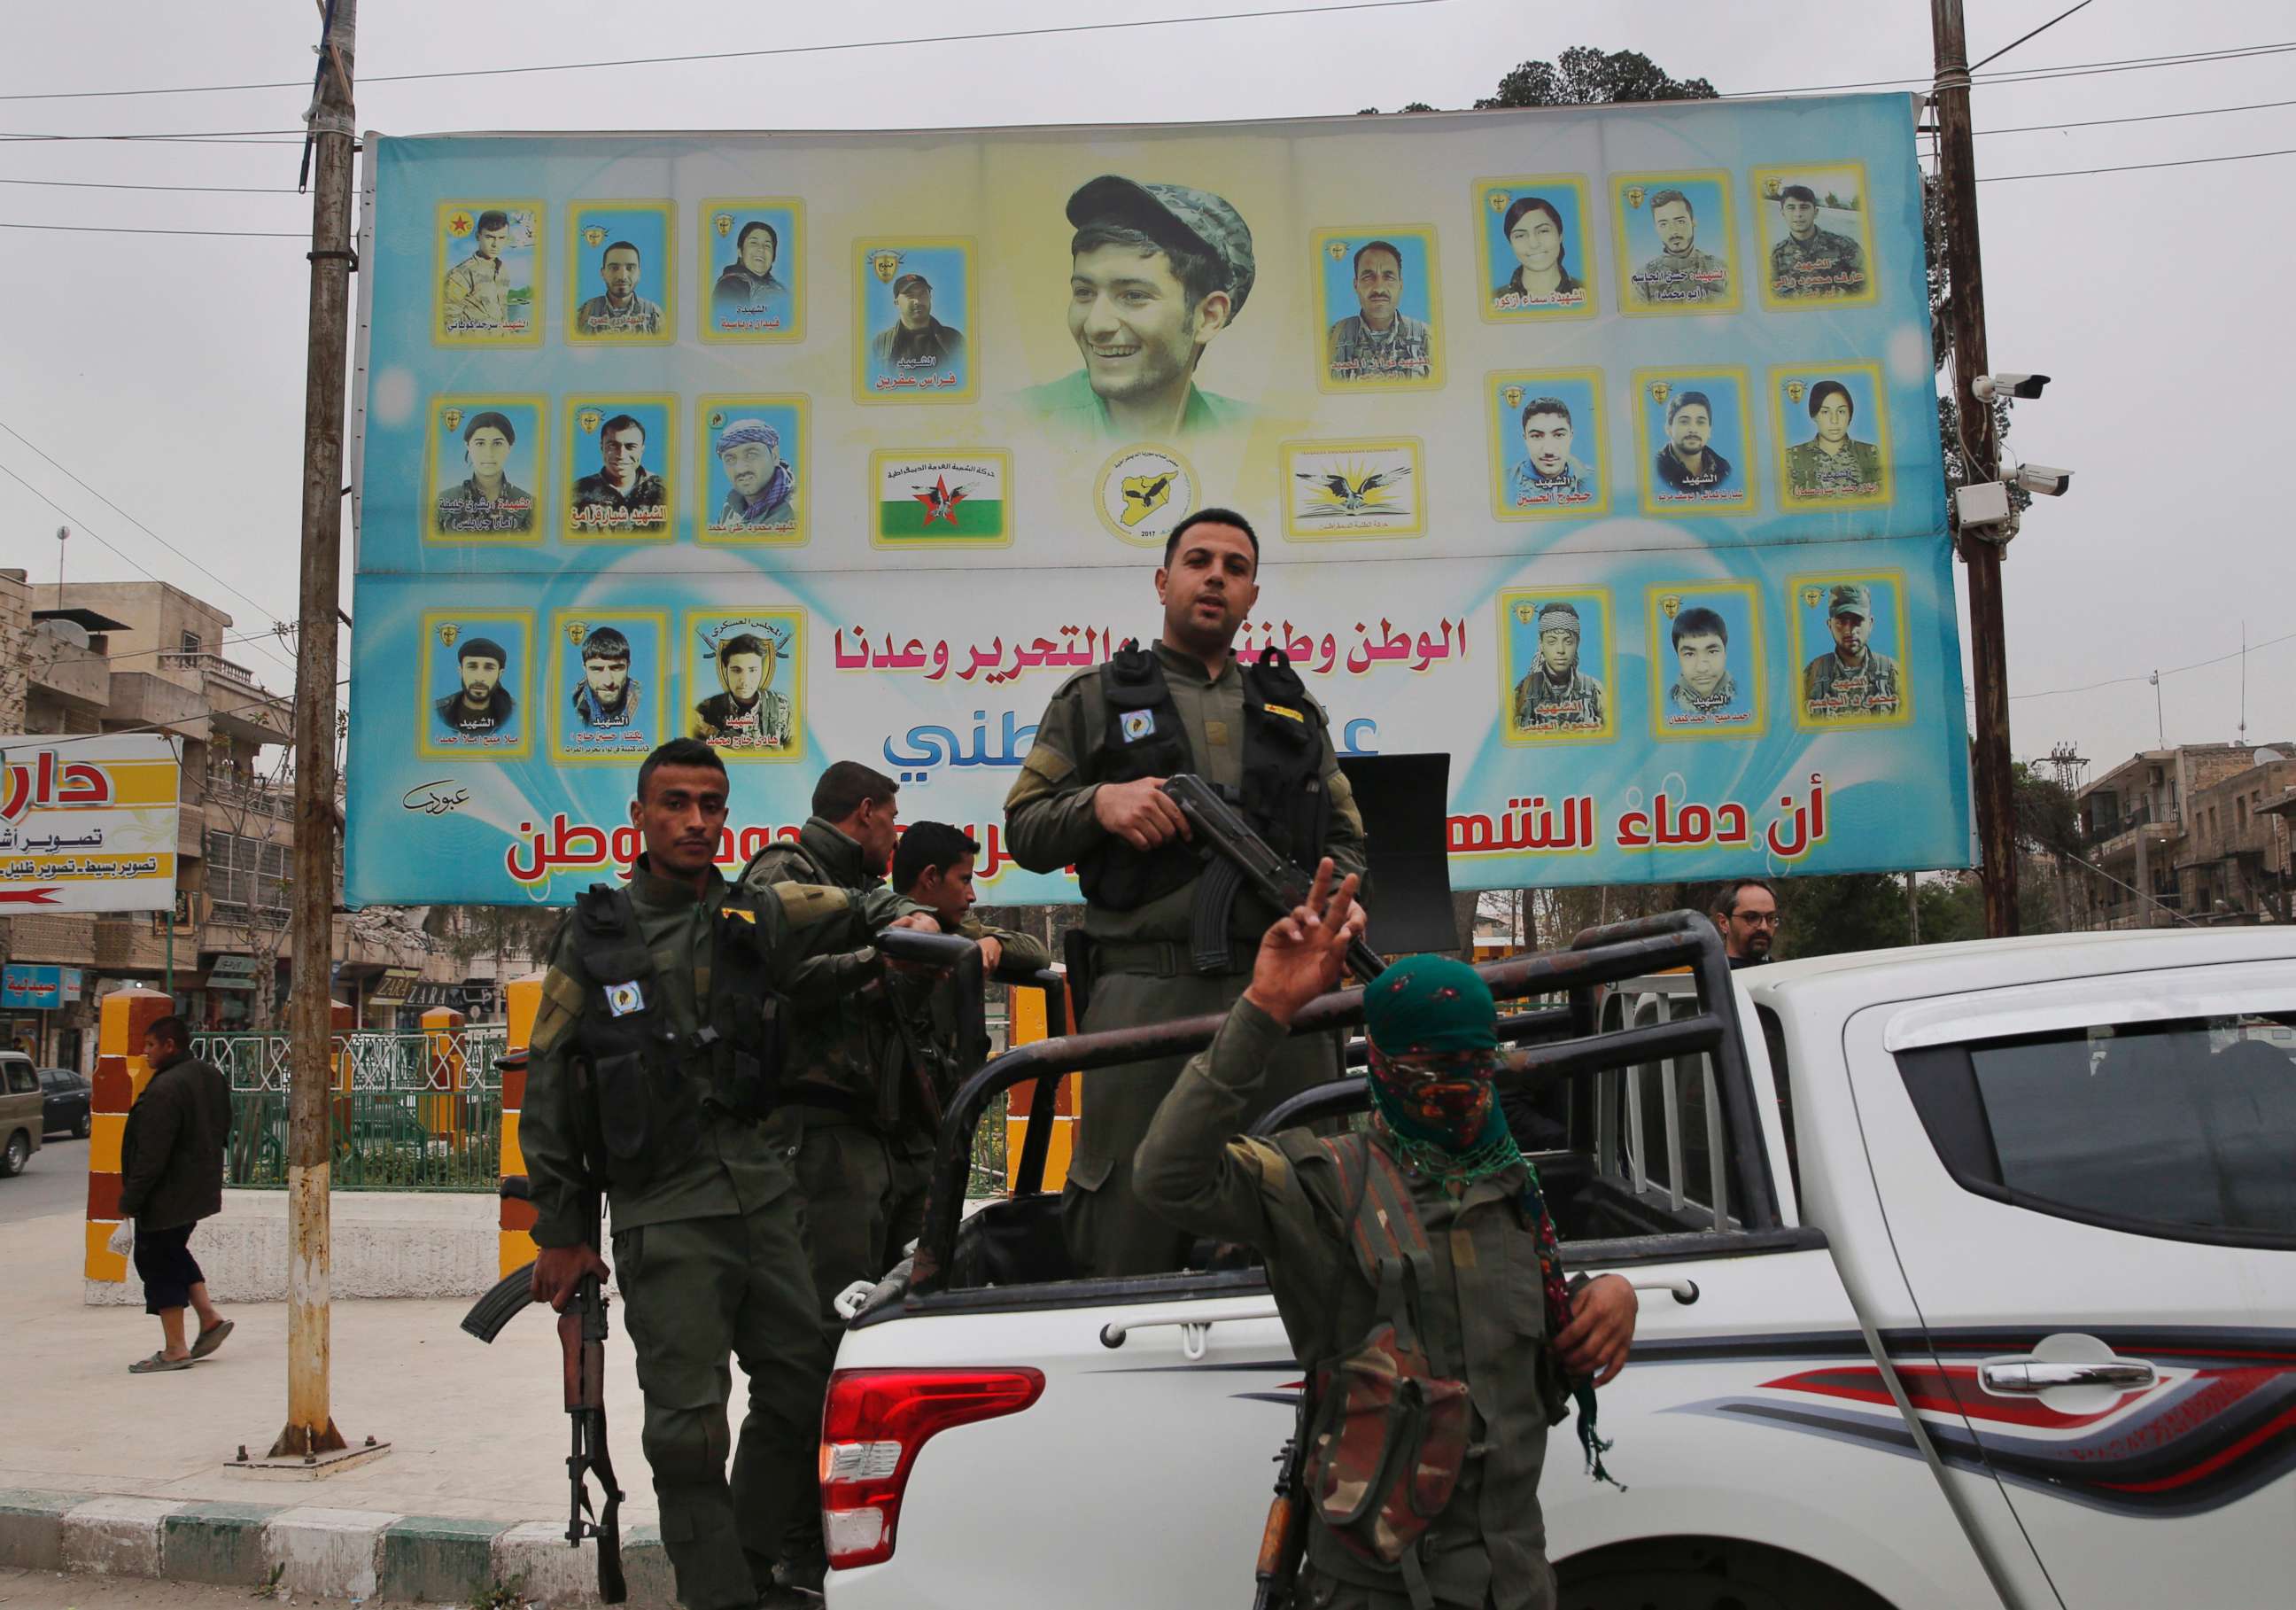 PHOTO: Members of the Kurdish internal security forces stand on their vehicle in front of a giant poster showing portraits of fighters killed fighting against the Islamic State group, in Manbij, Syria, March 28, 2018.